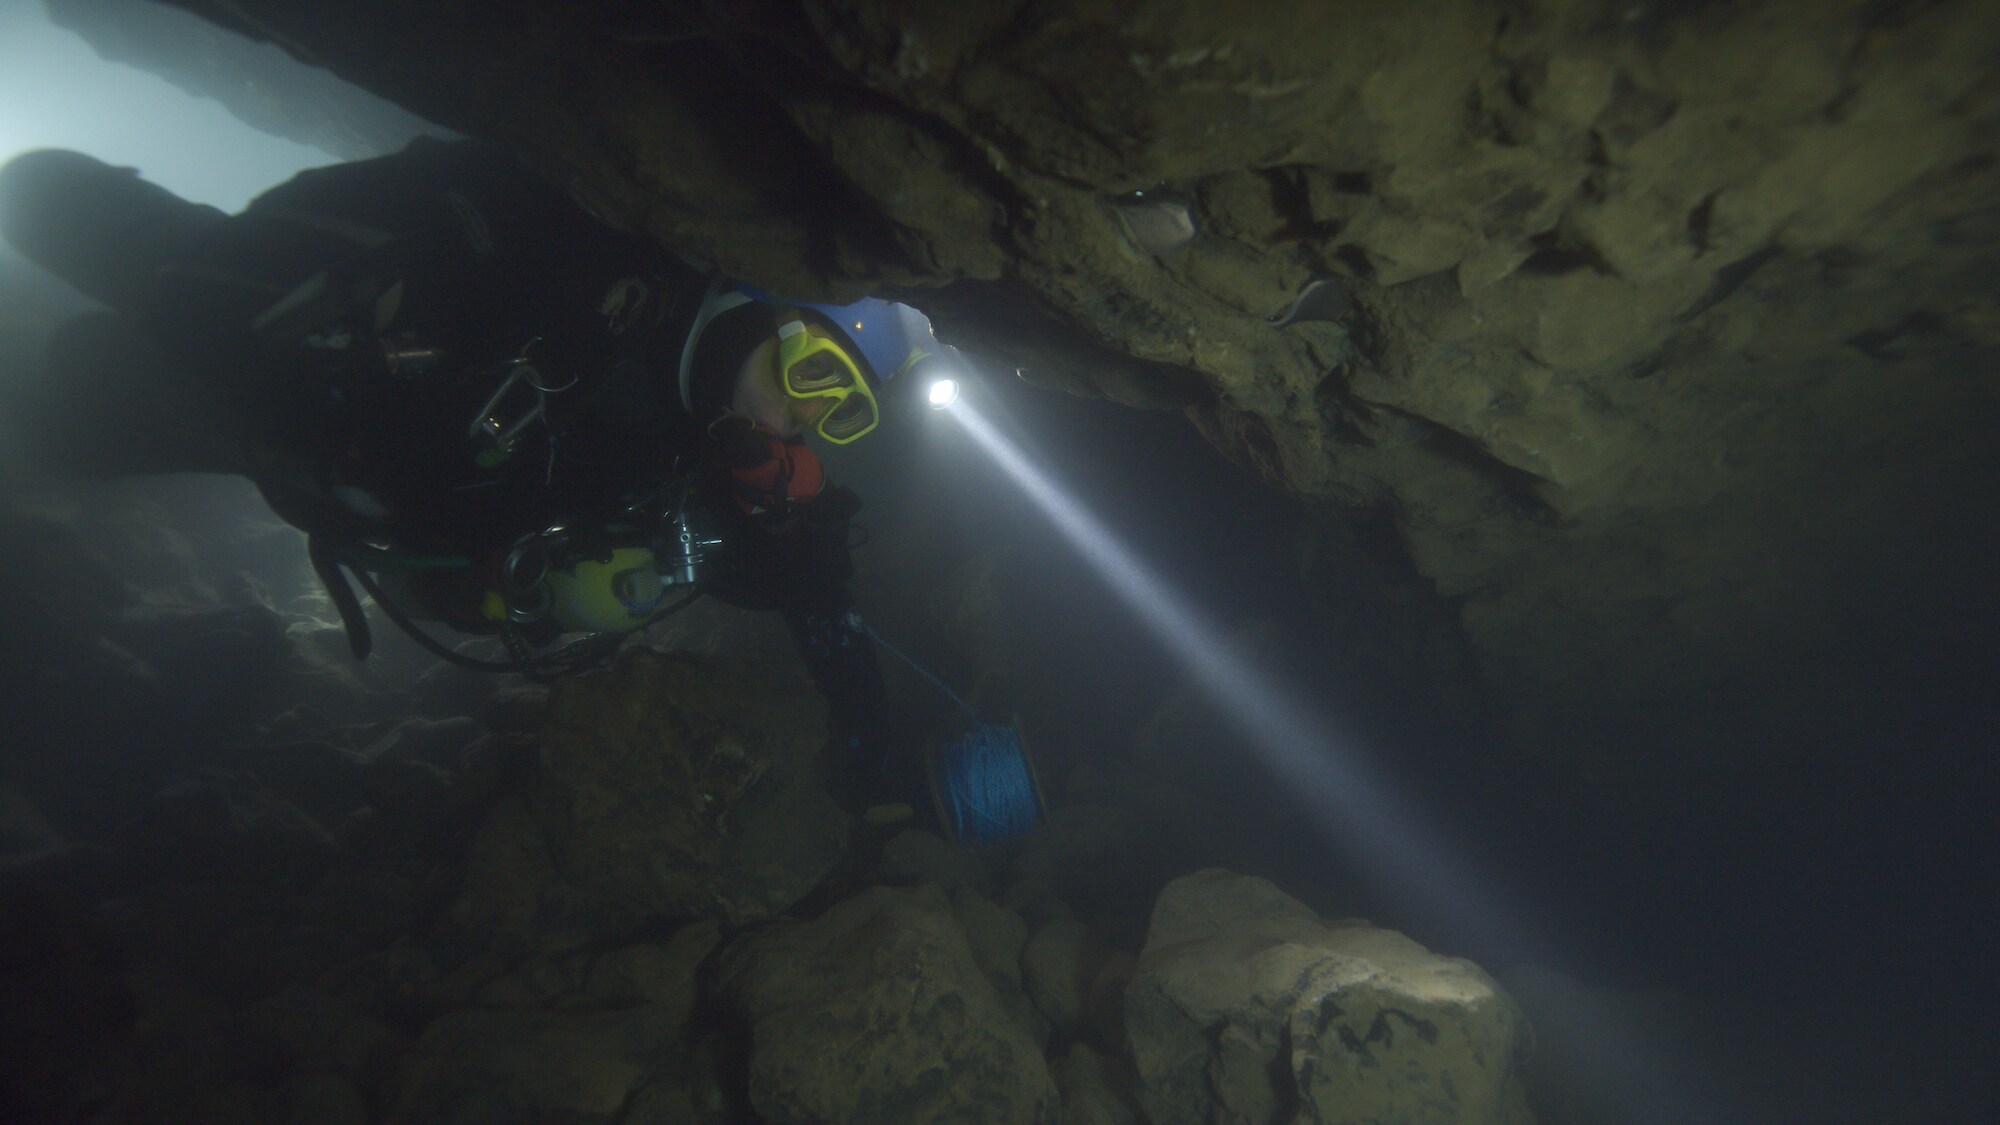 A diver swims through an underwater cave.   THE RESCUE chronicles the 2018 rescue of 12 Thai boys and their soccer coach, trapped deep inside a flooded cave. E. Chai Vasarhelyi and Jimmy Chin reveal the perilous world of cave diving, bravery of the rescuers, and dedication of a community that made great sacrifices to save these young boys. (Credit: National Geographic)